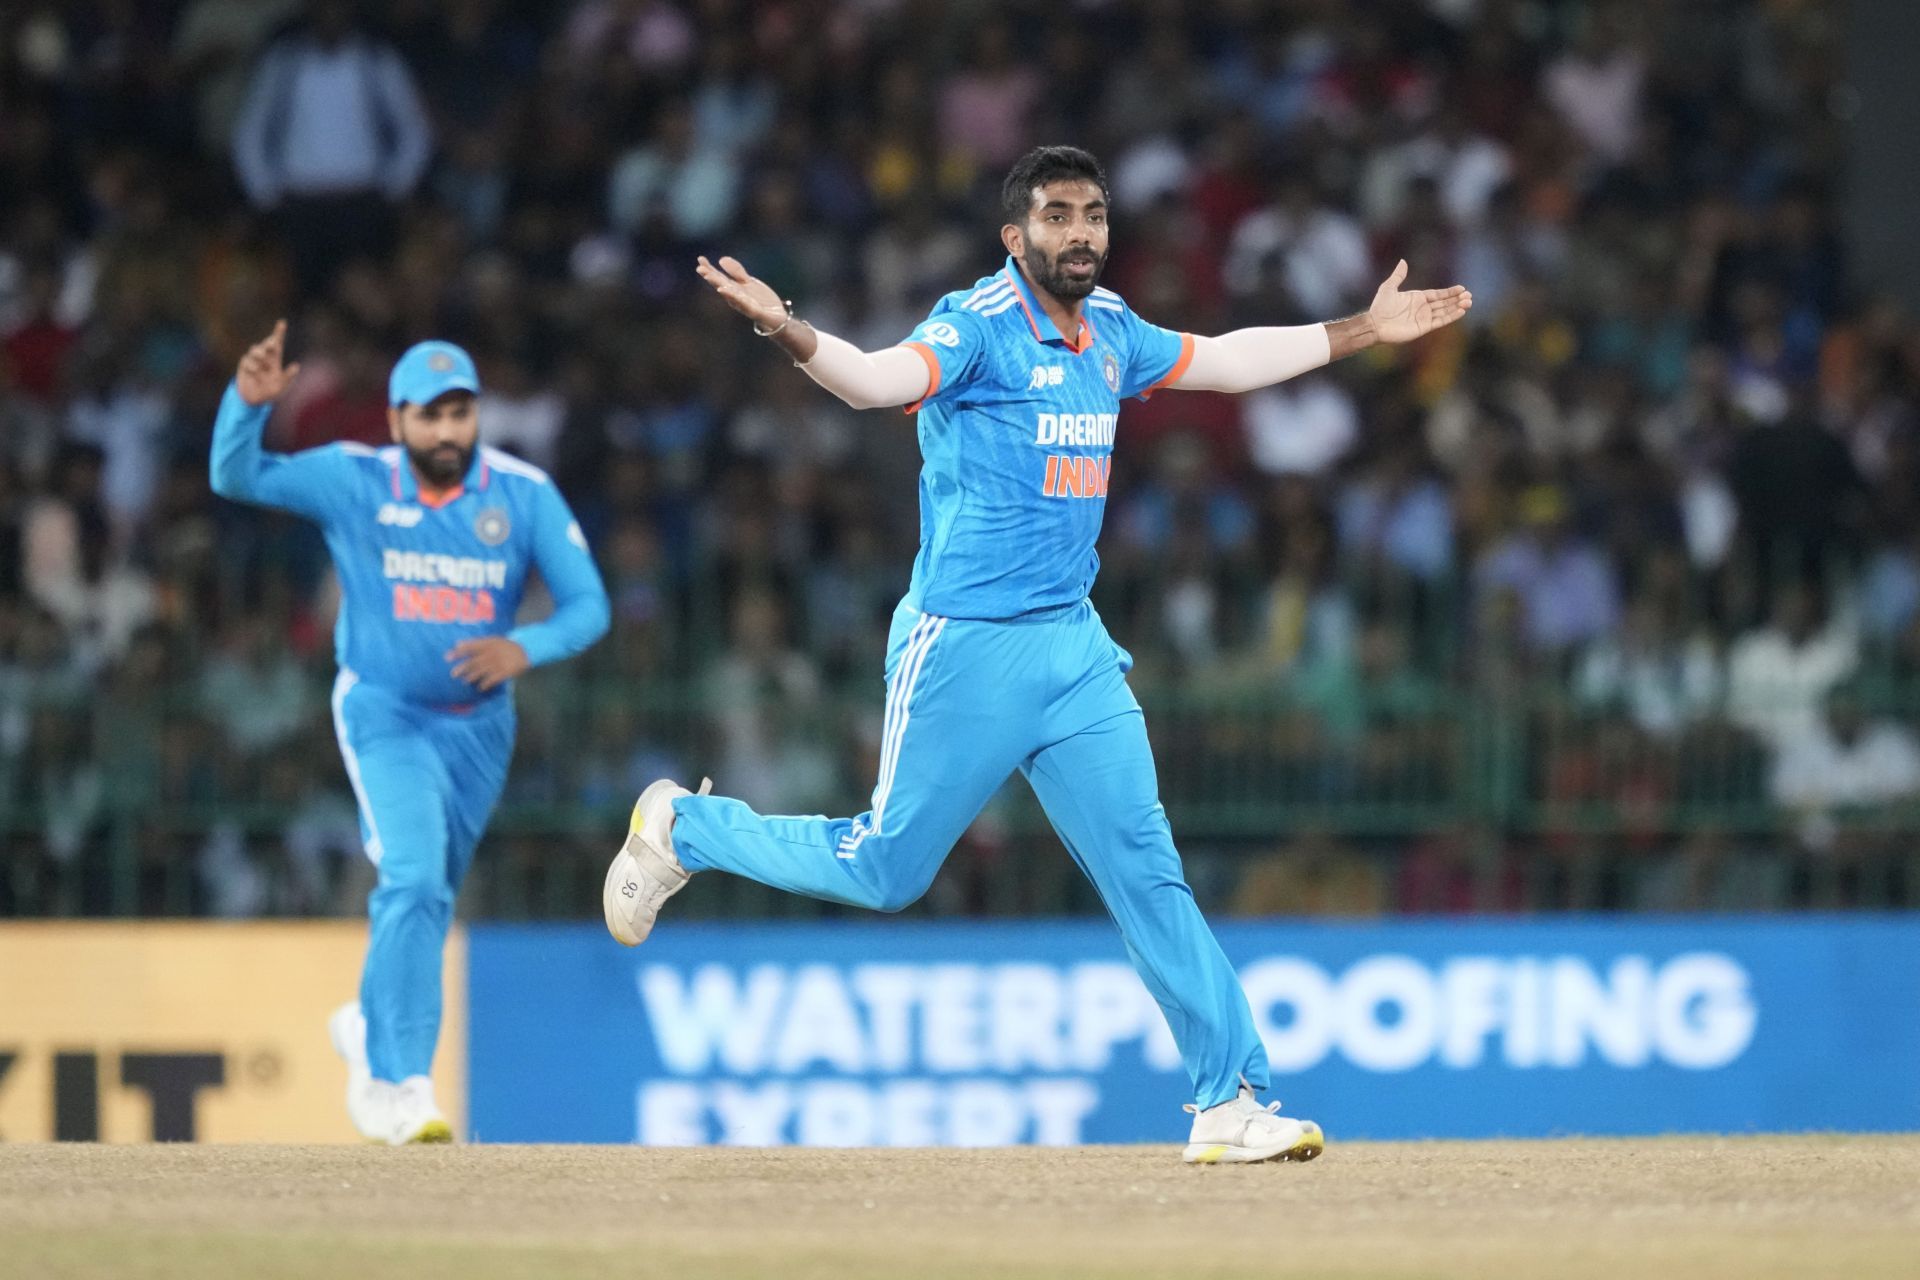 Jasprit Bumrah gave India their first two breakthroughs against Sri Lanka. [P/C: AP]